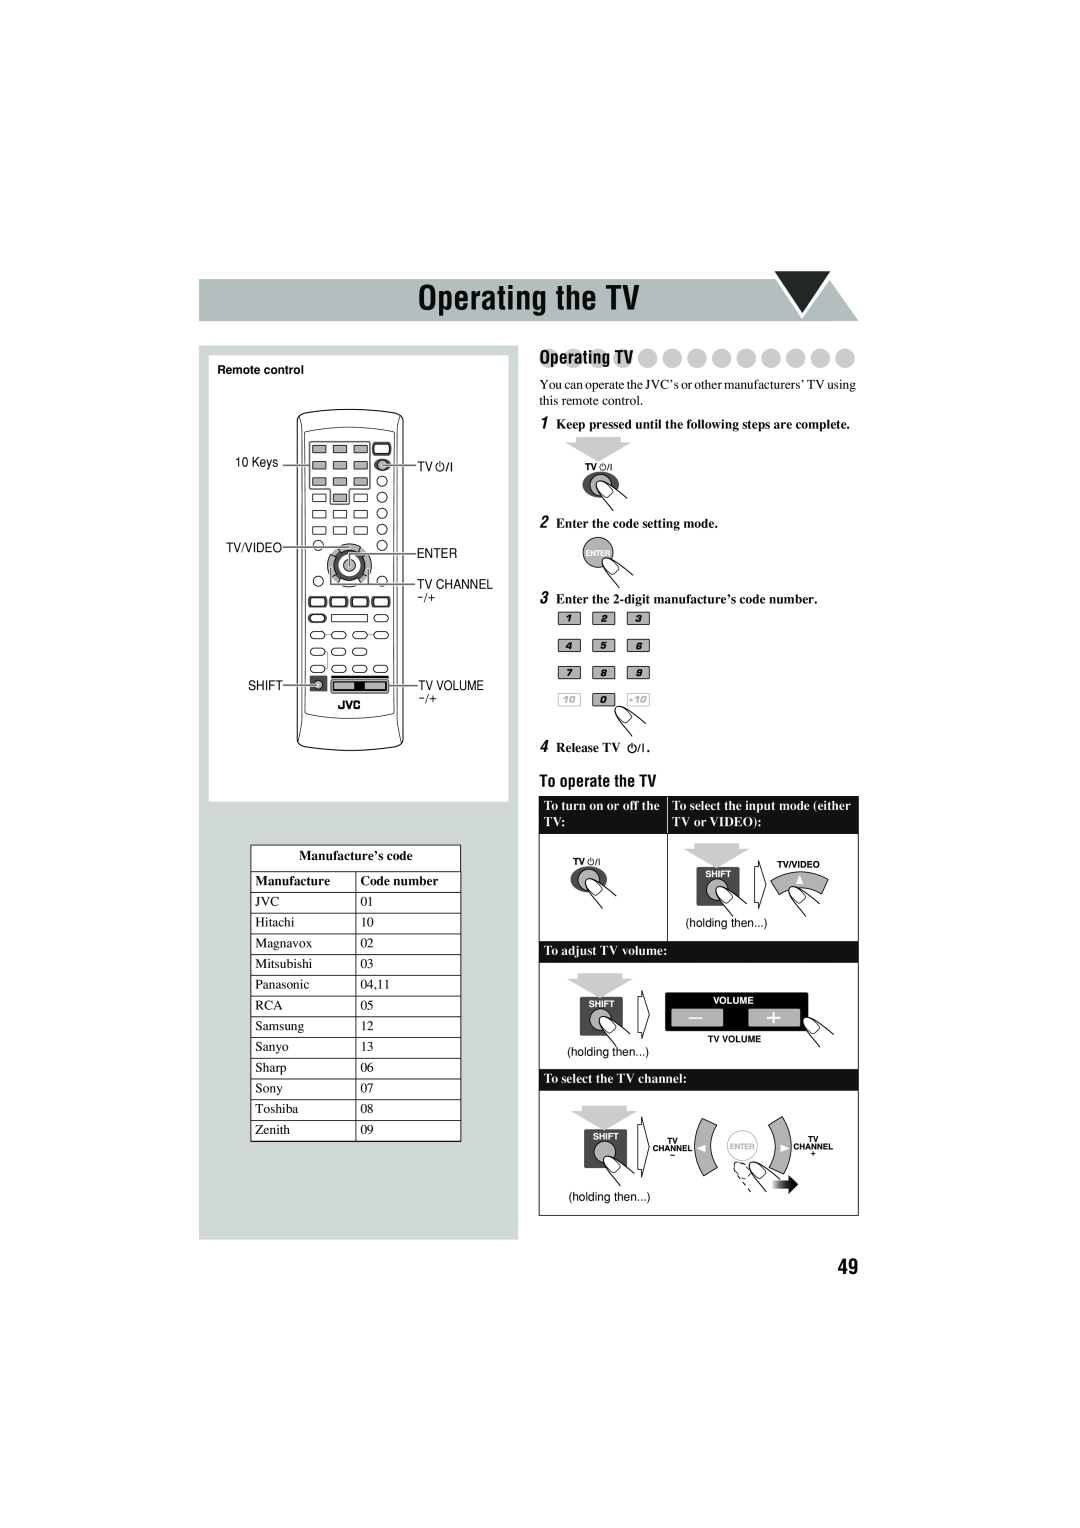 JVC CA-MXJD8UW manual Operating the TV, Operating TV, To operate the TV, Manufacture’s code, Code number 